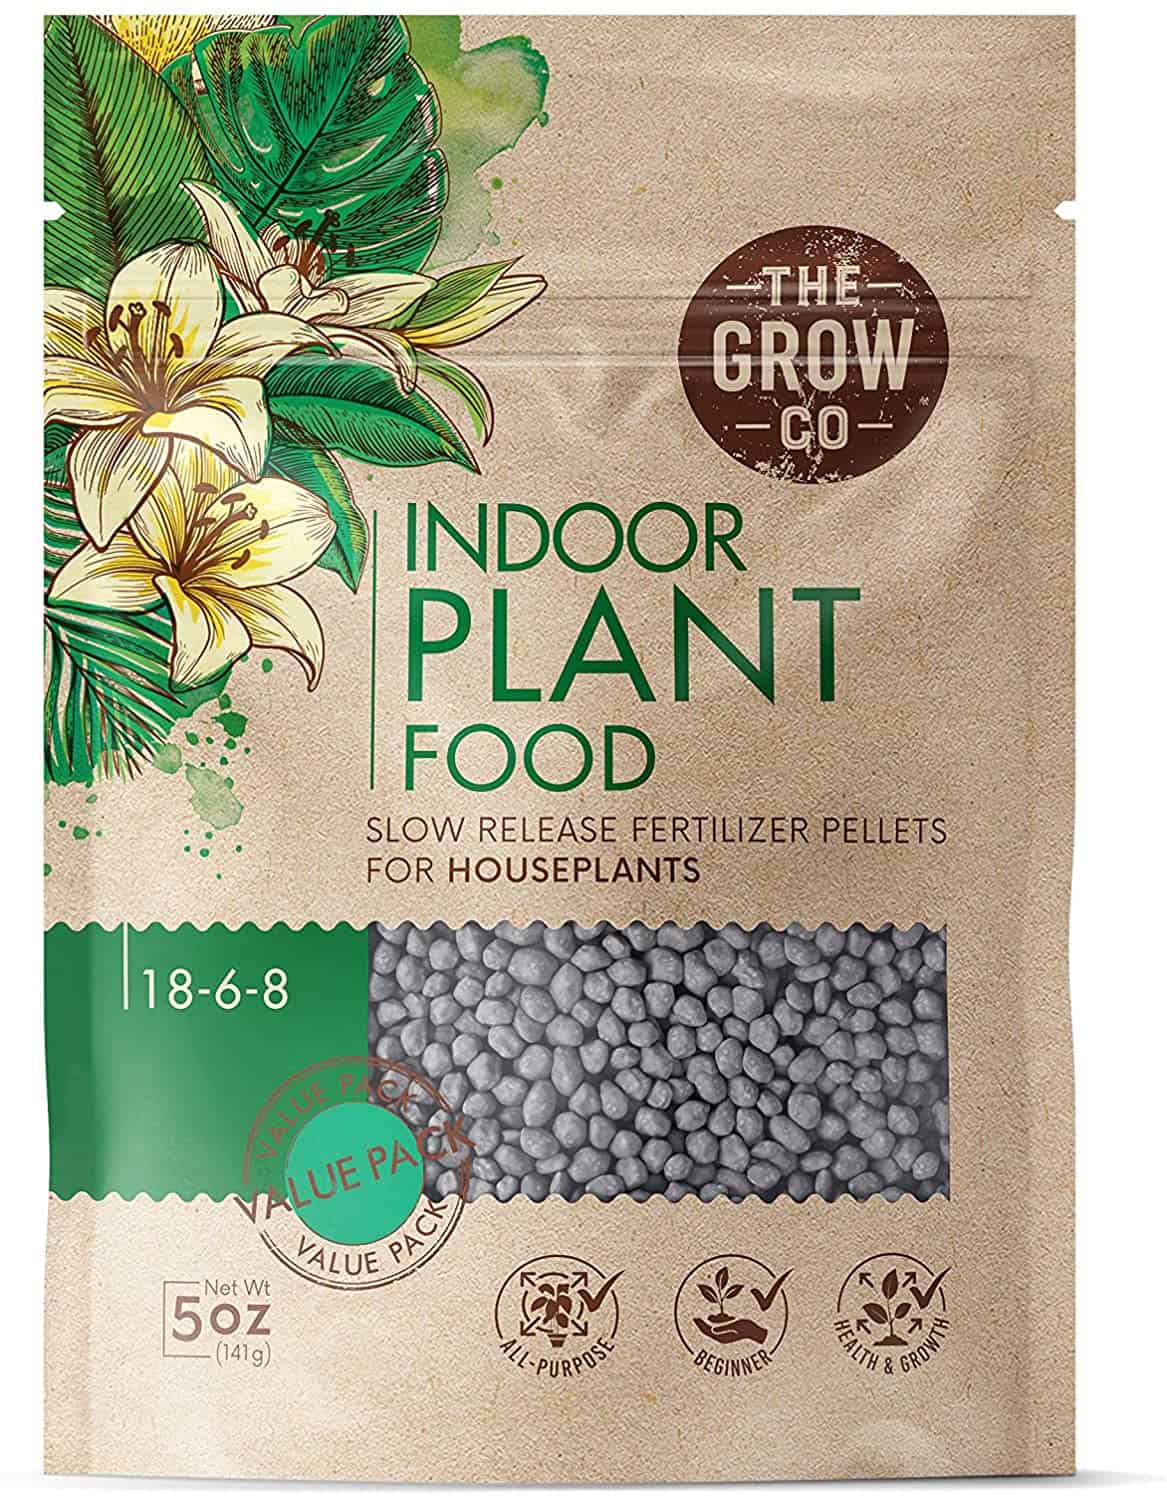 Grow Co indoor plant food can be used to fertilize houseplants